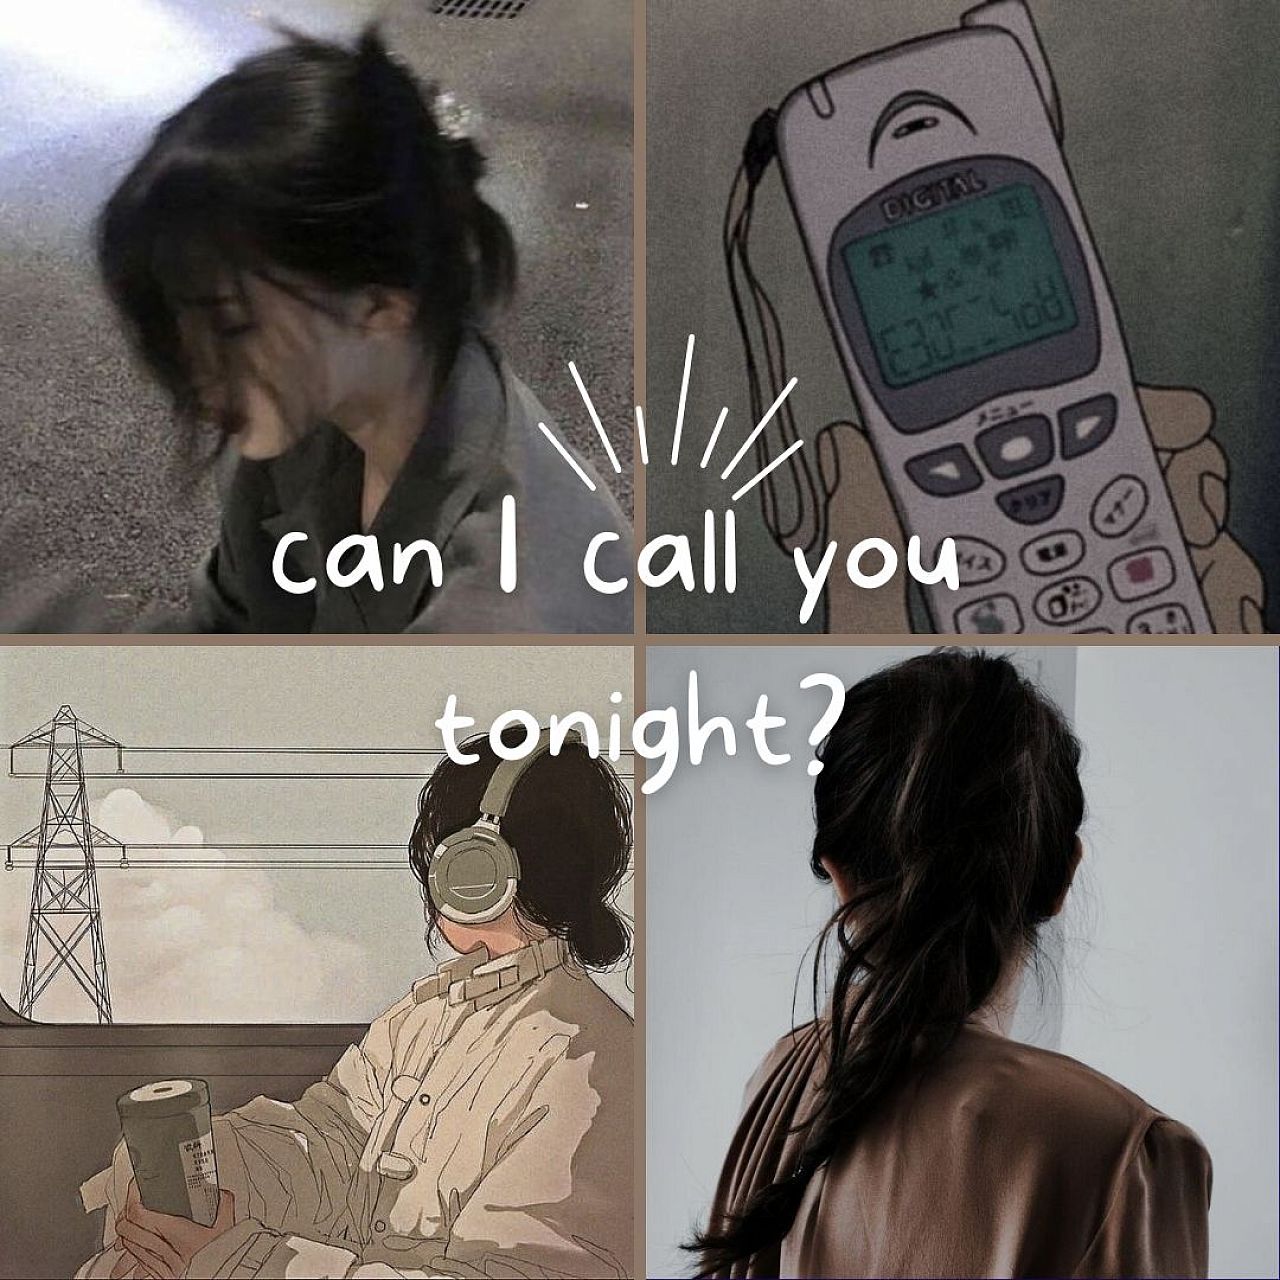 Can I call you tonight?